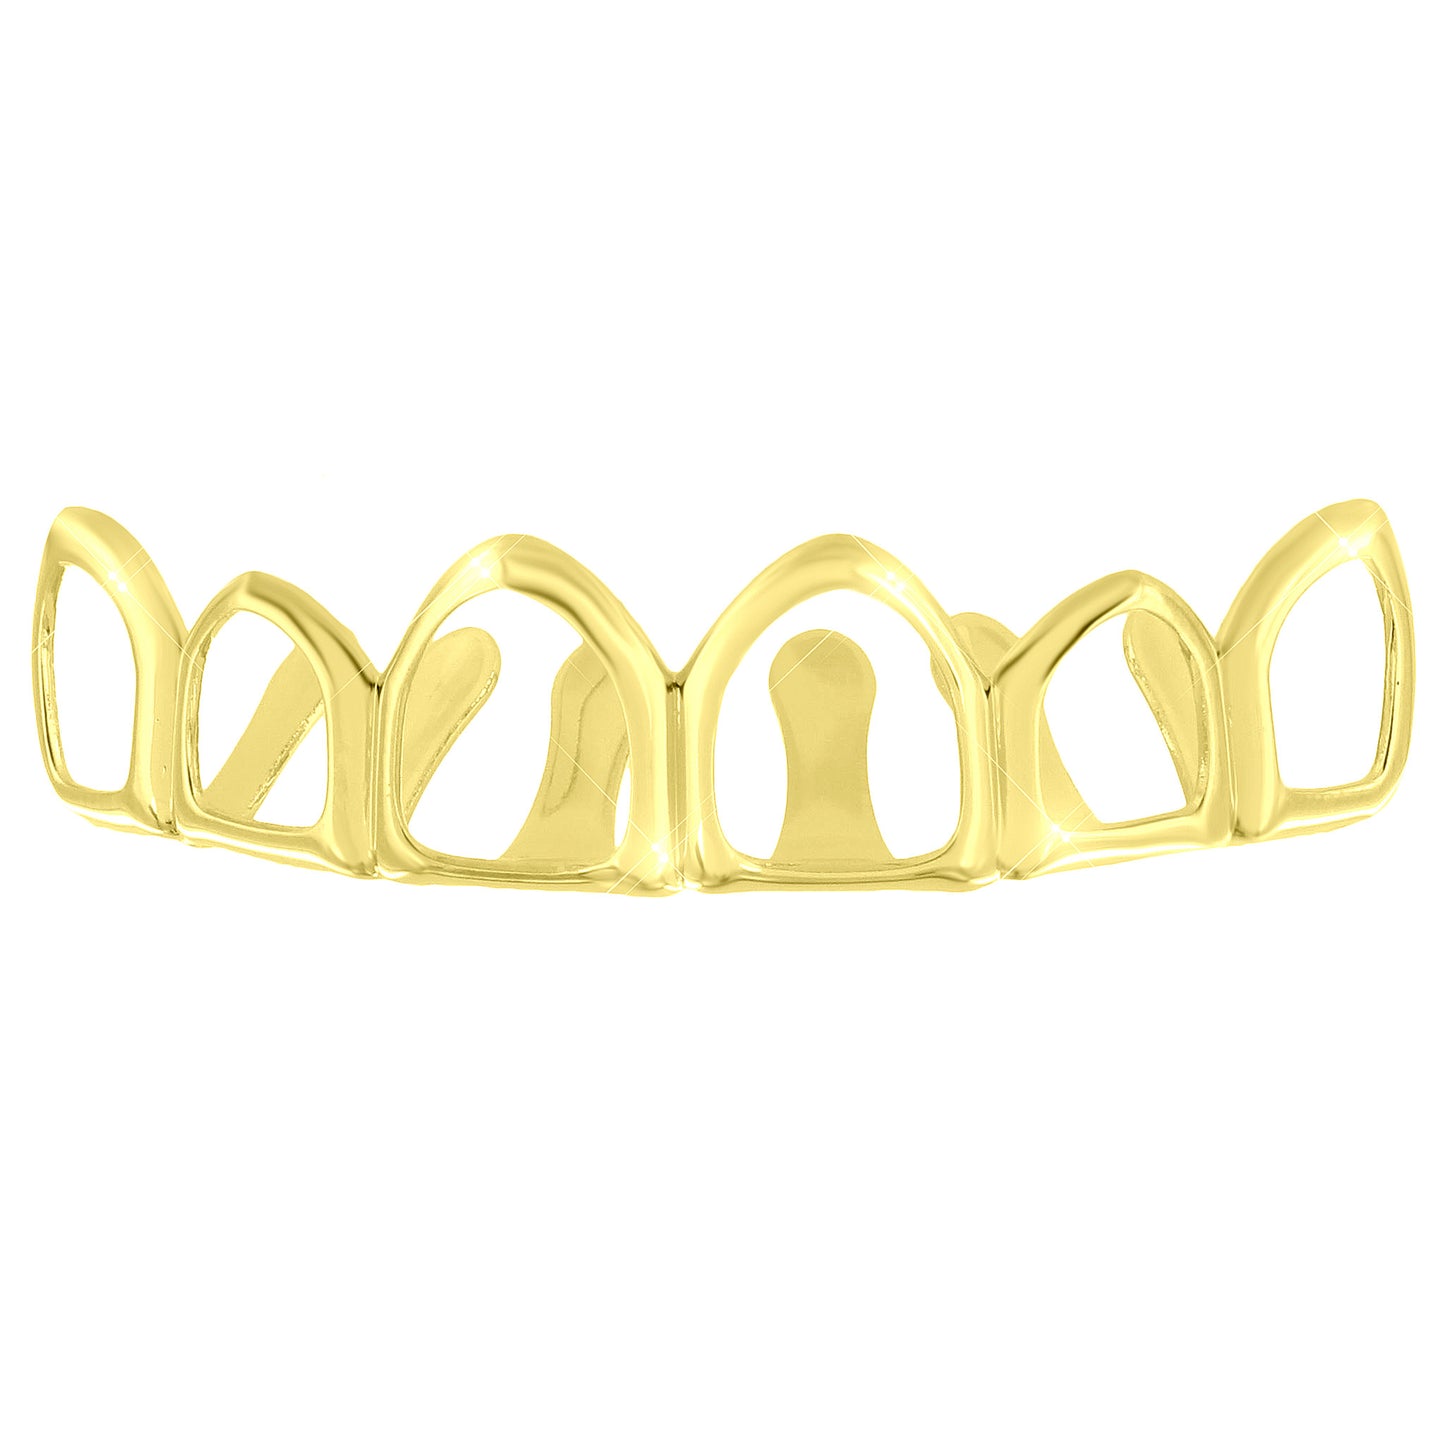 See through Top Teeth Grillz 14k Yellow Gold Finish